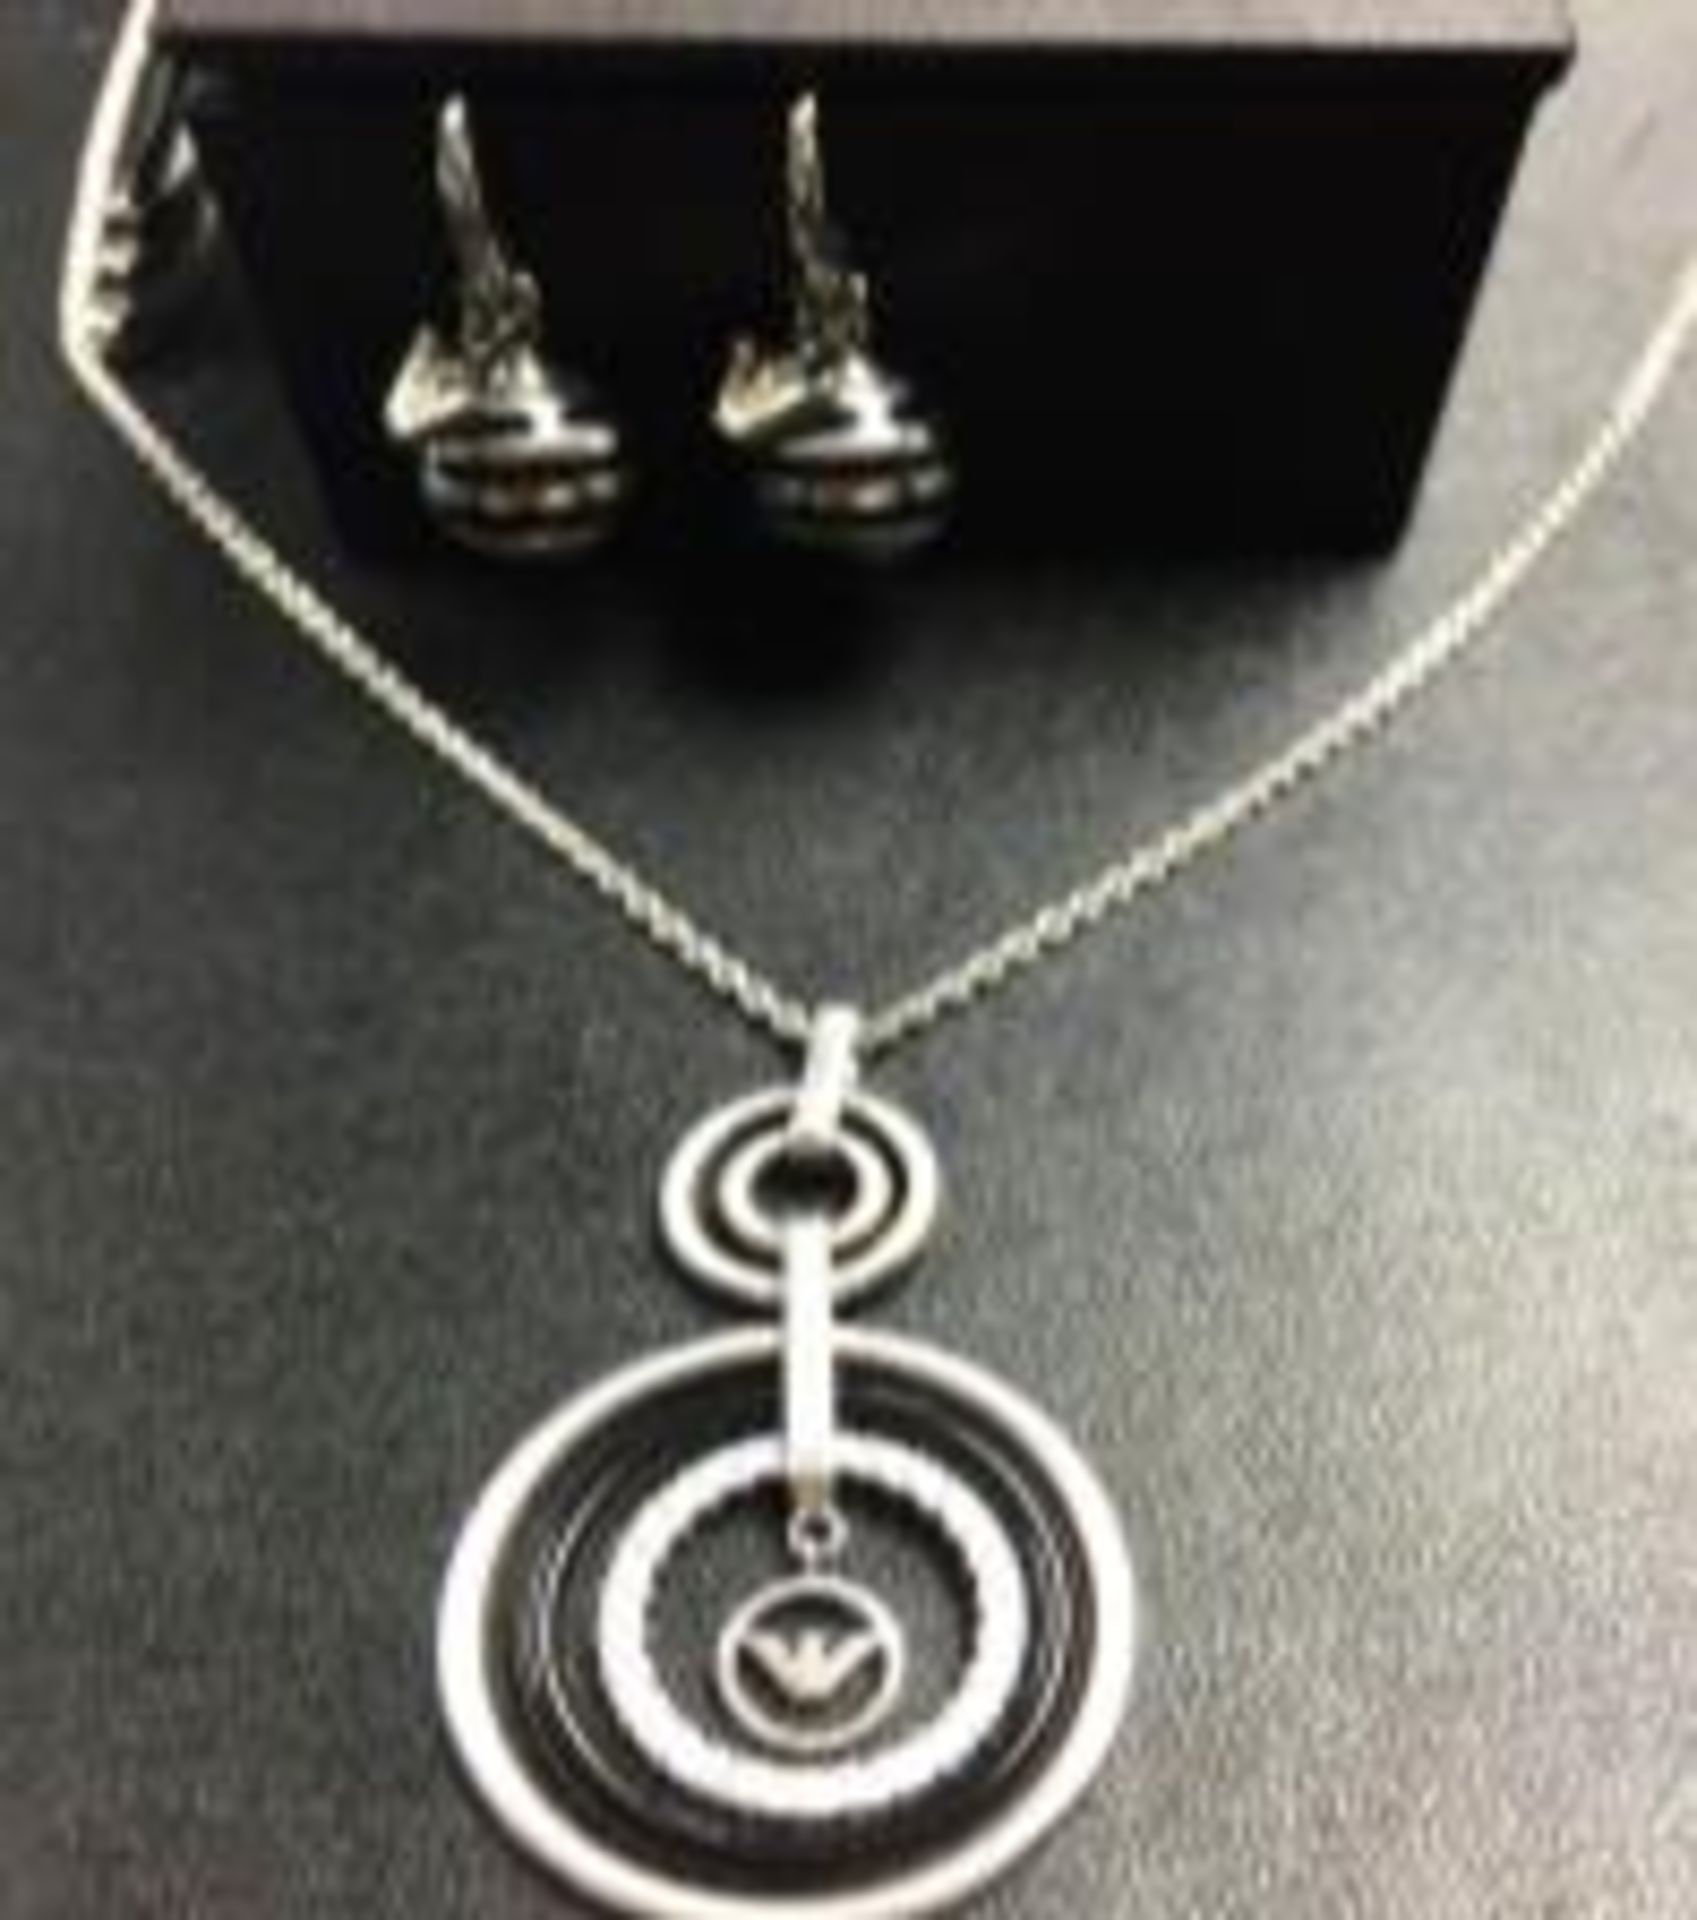 Emporio Armani sterling silver necklace with multi ring pendant and matching Silver ball earrings